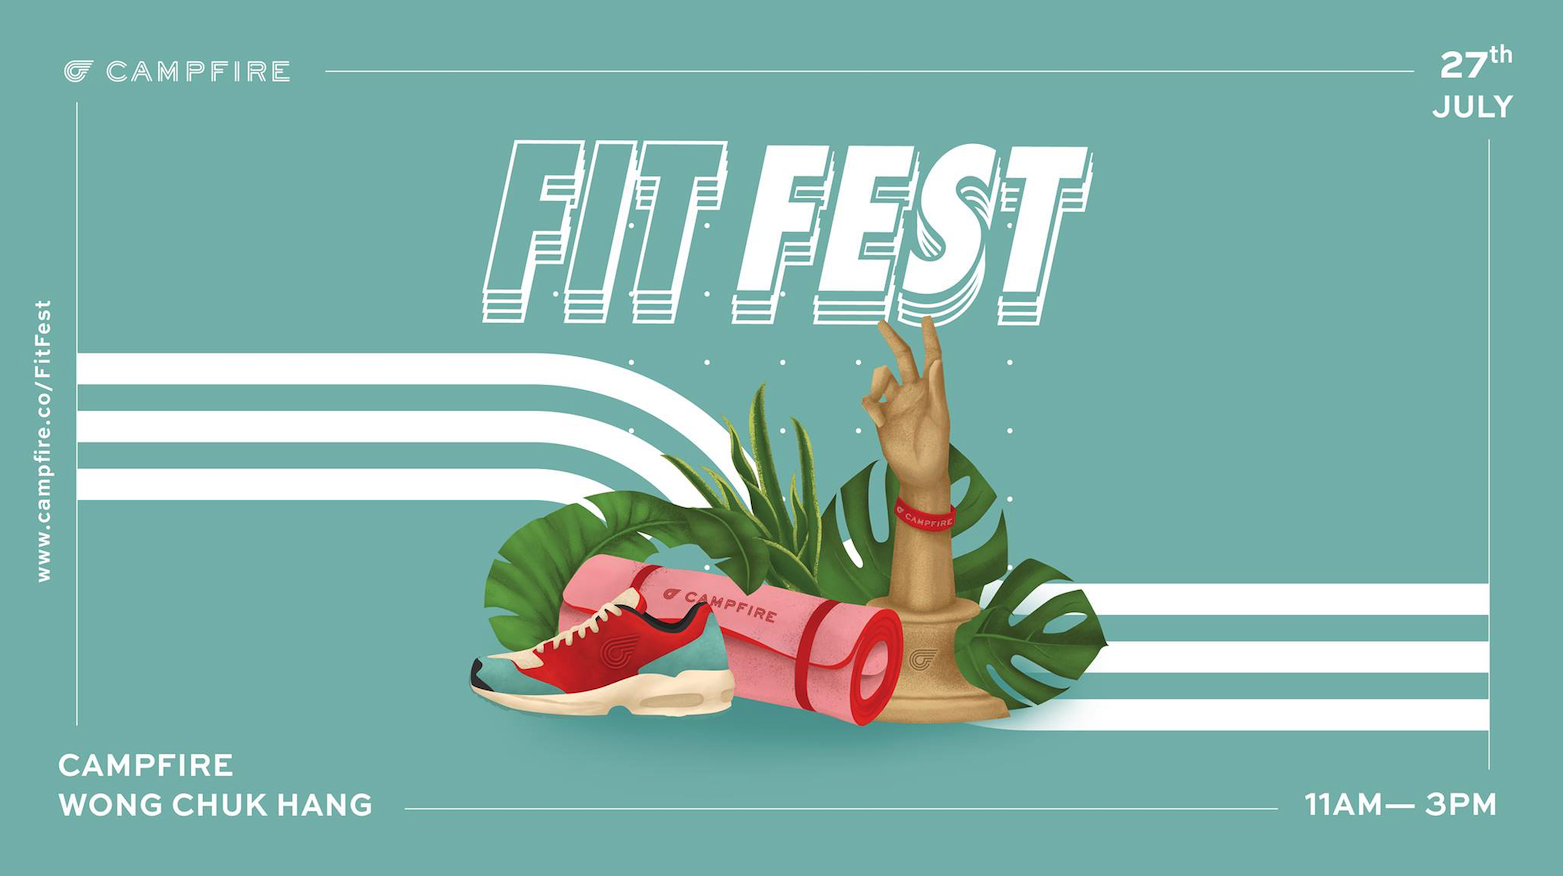 Campfire Fitfest